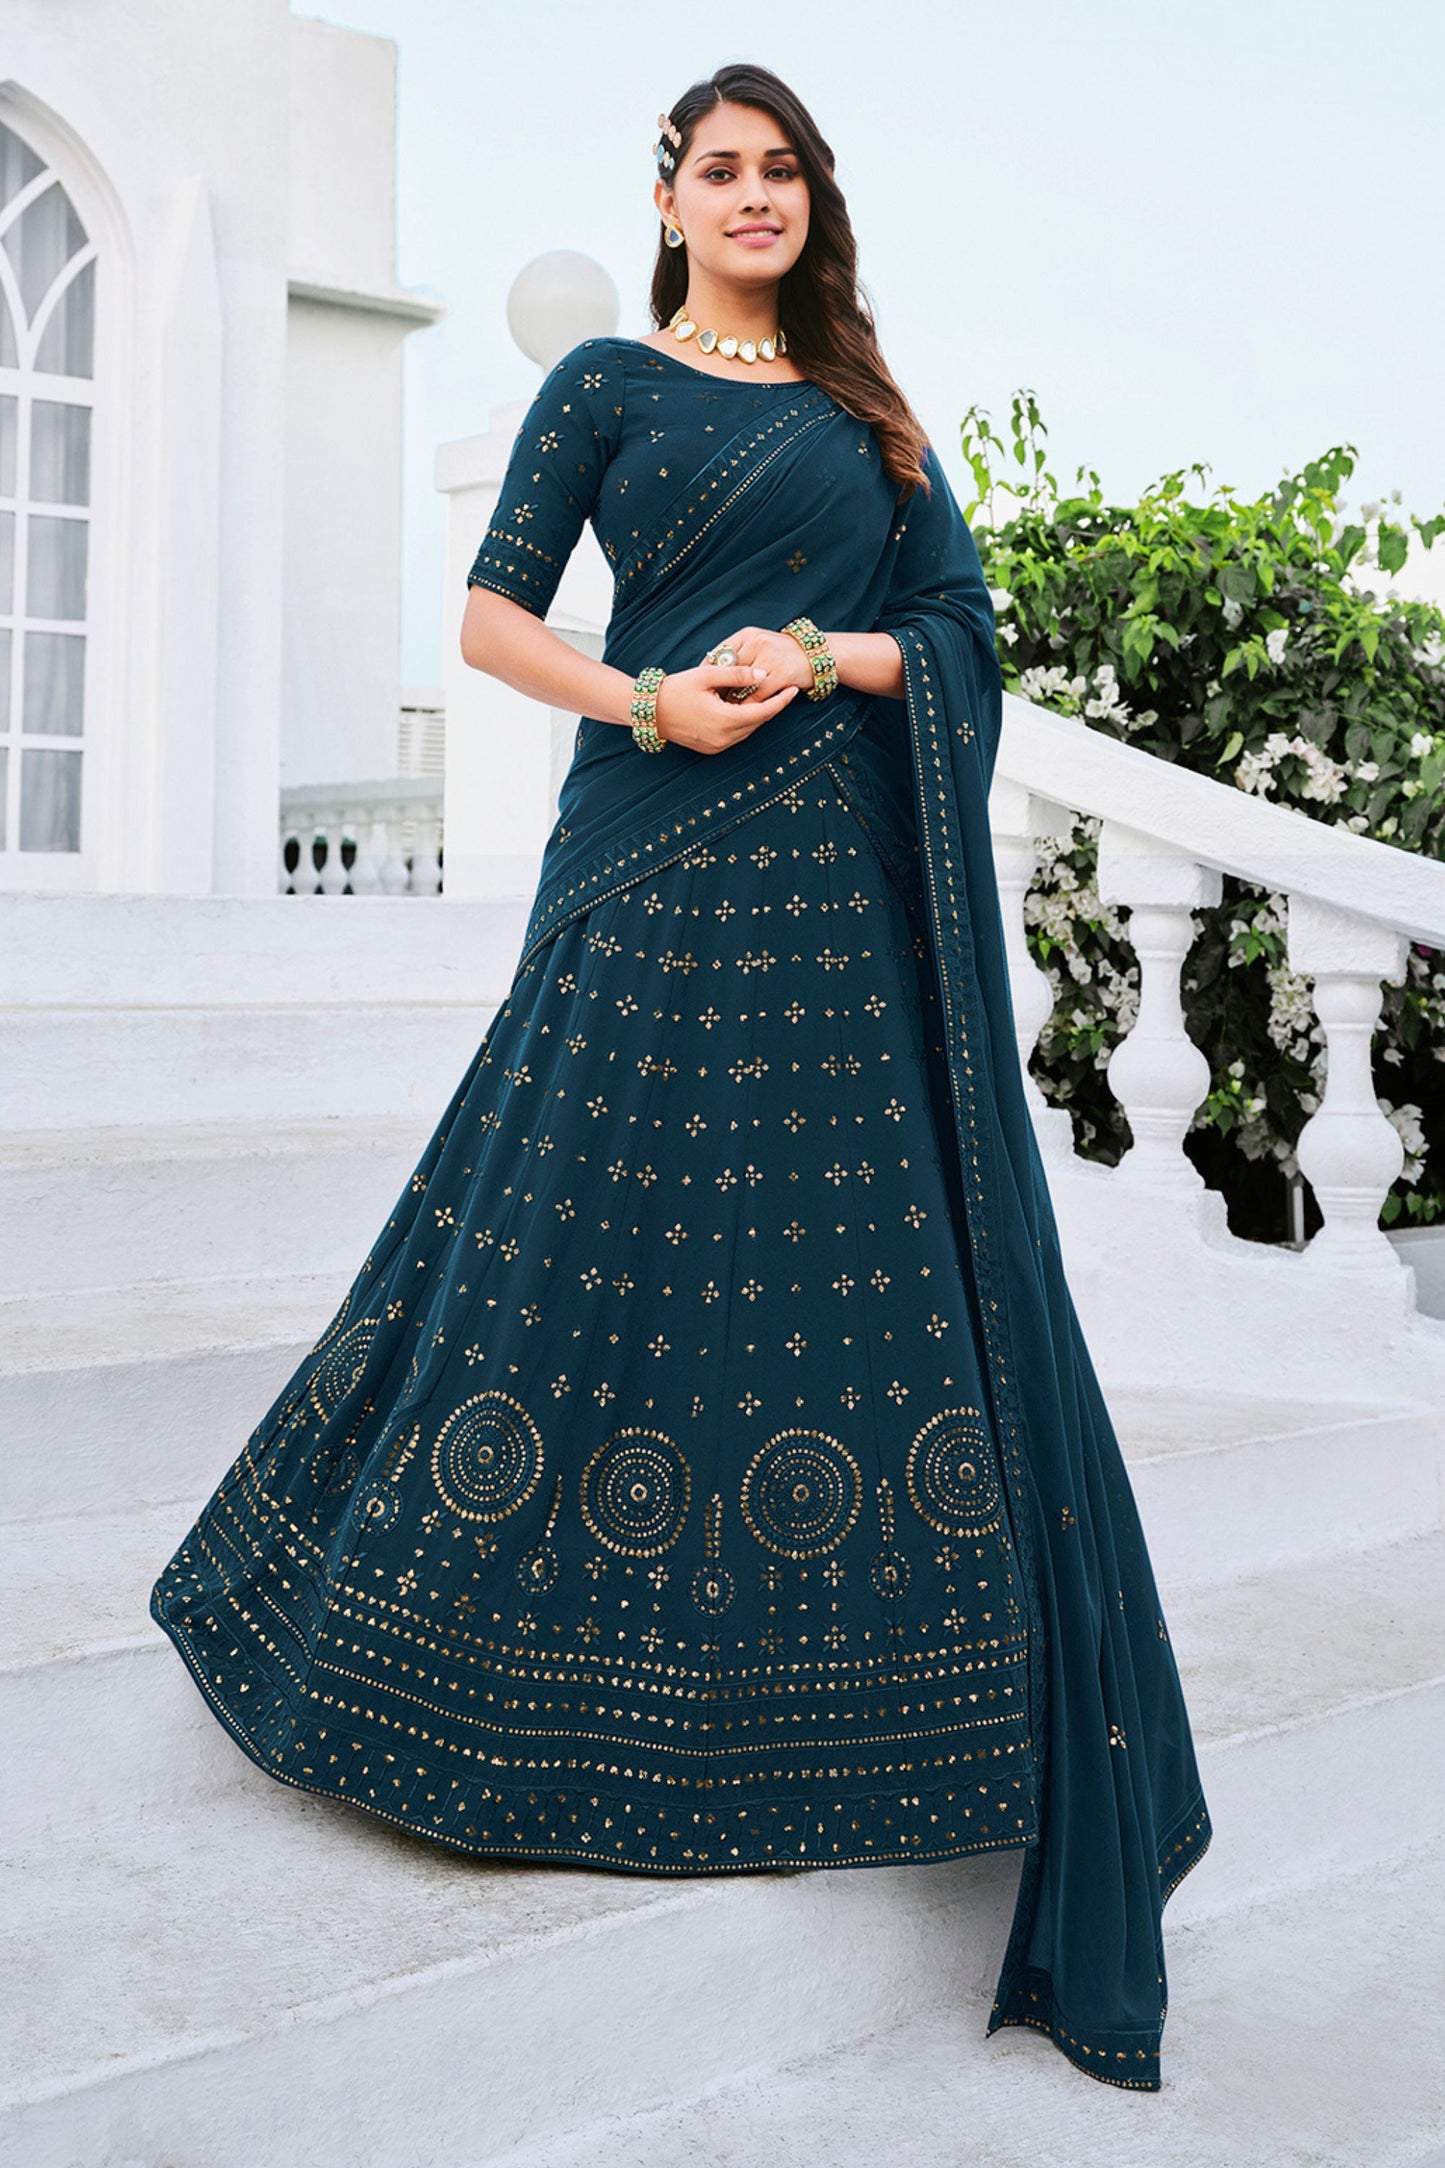 Teal Georgette Lehenga Choli Set For Indian Festivals & Weddings - Sequence Work & Thread Embroidery Work